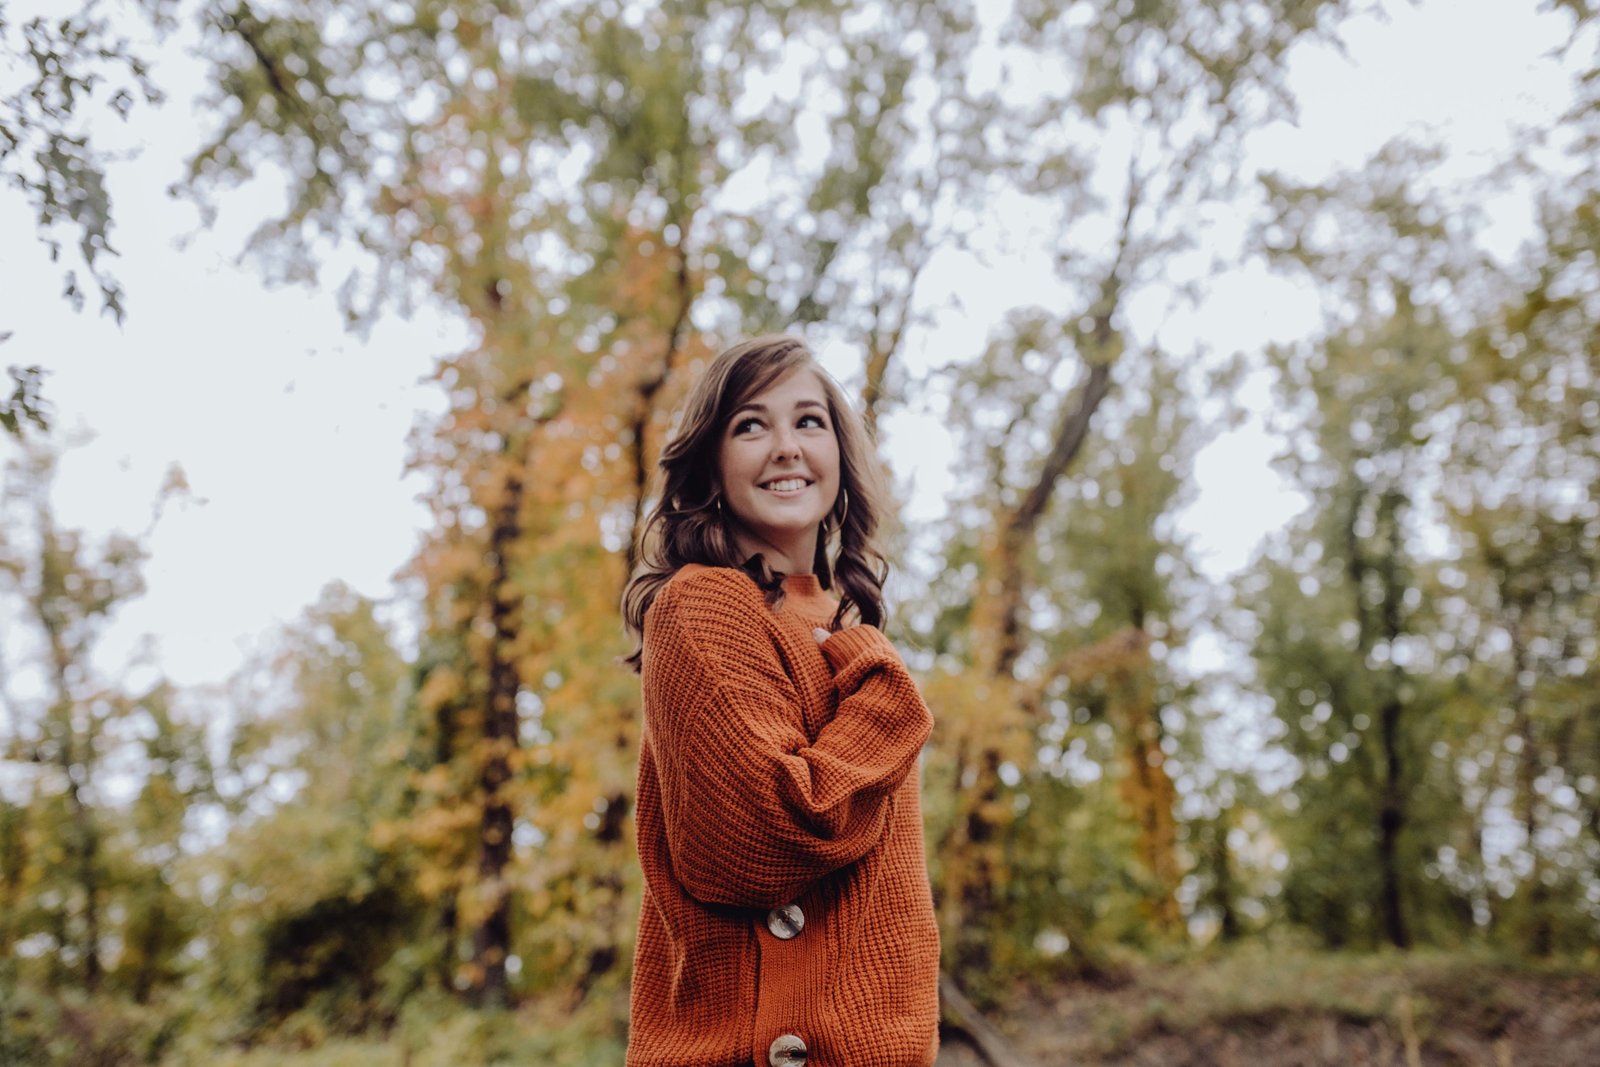 Girl wearing orange sweater, holding hand to chest and looking up with a smile on her face.